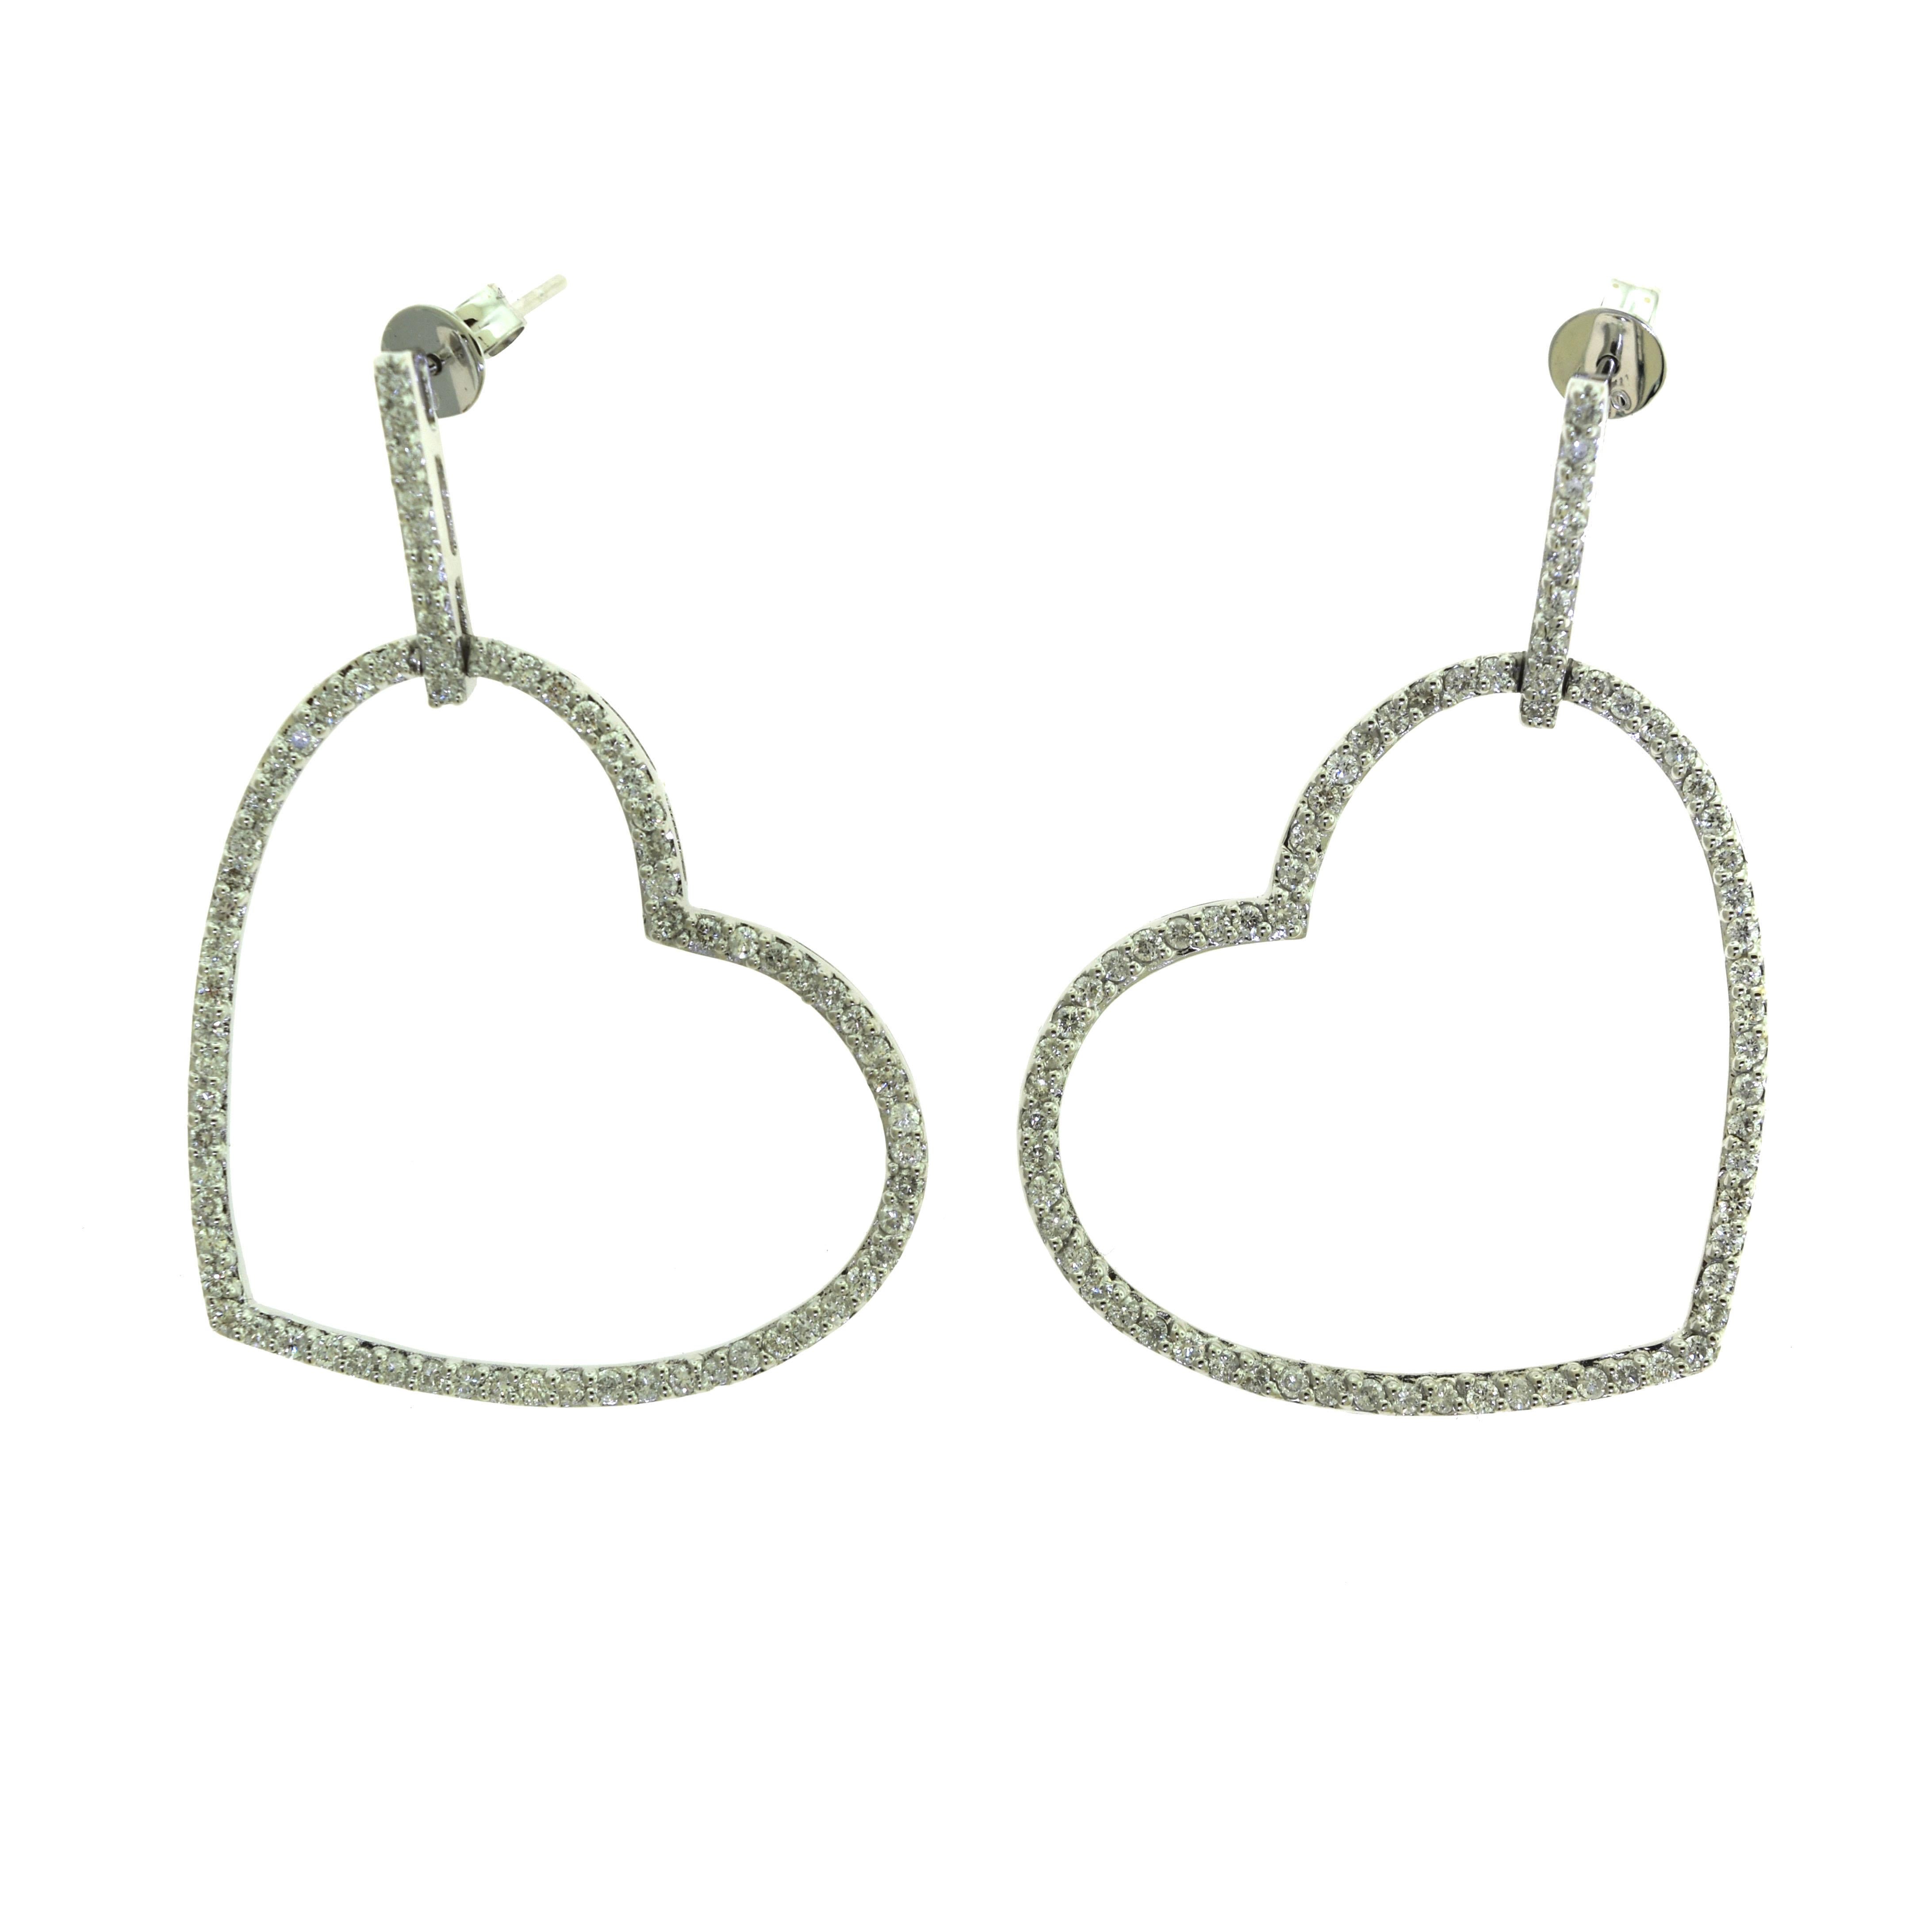 Brilliance Jewels, Miami
Questions? Call Us Anytime!
786,482,8100

Style: Heart Dangle Earrings 

Metal: White Gold 

Stones: Round Diamonds

Diamond Color: G-H

Diamond Clarity: VS

Total Carat Weight: Approx. 1.9 ct (0.95 ct each)  

Total Item